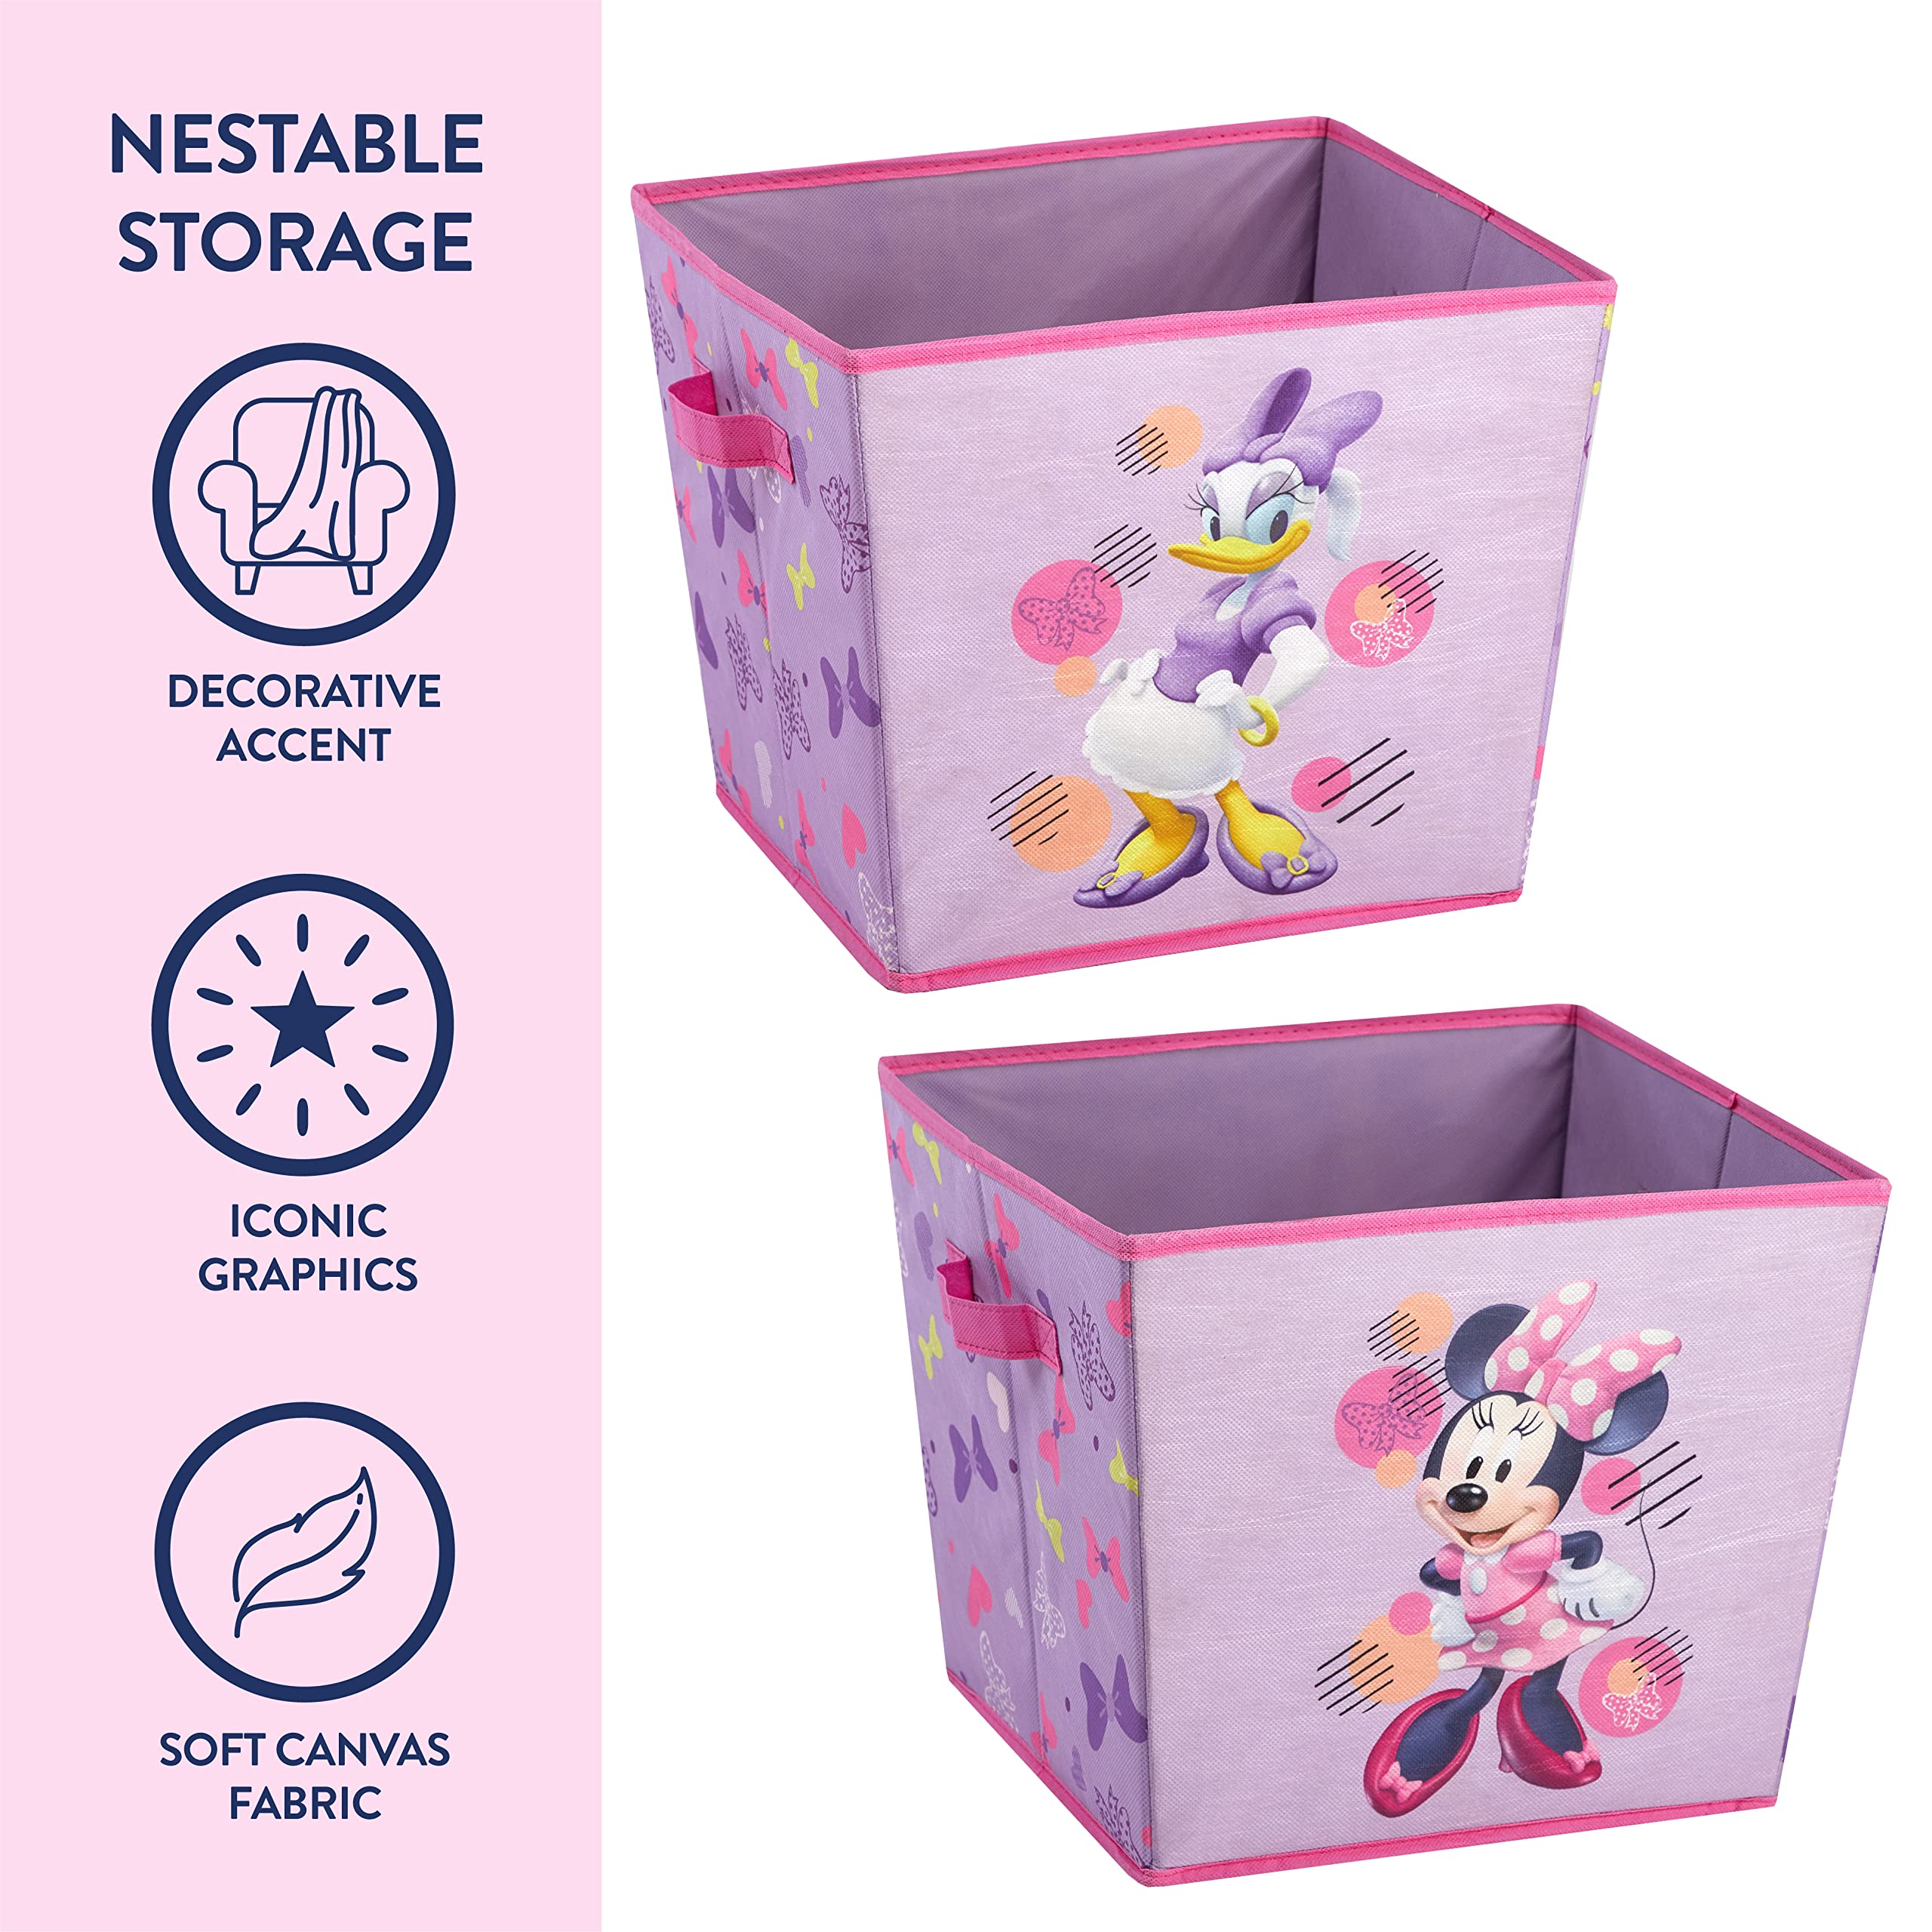 Disney Minnie Mouse 4 Piece Storage Solution Set with Pop Up Hamper, Collapsible Storage Trunk and 2 Nestable Storage Bins